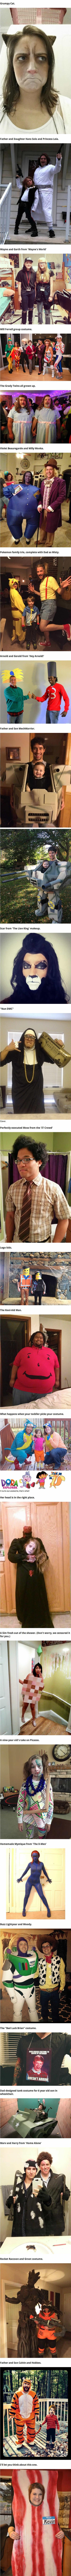 28 clever halloween costumes as found on the internet